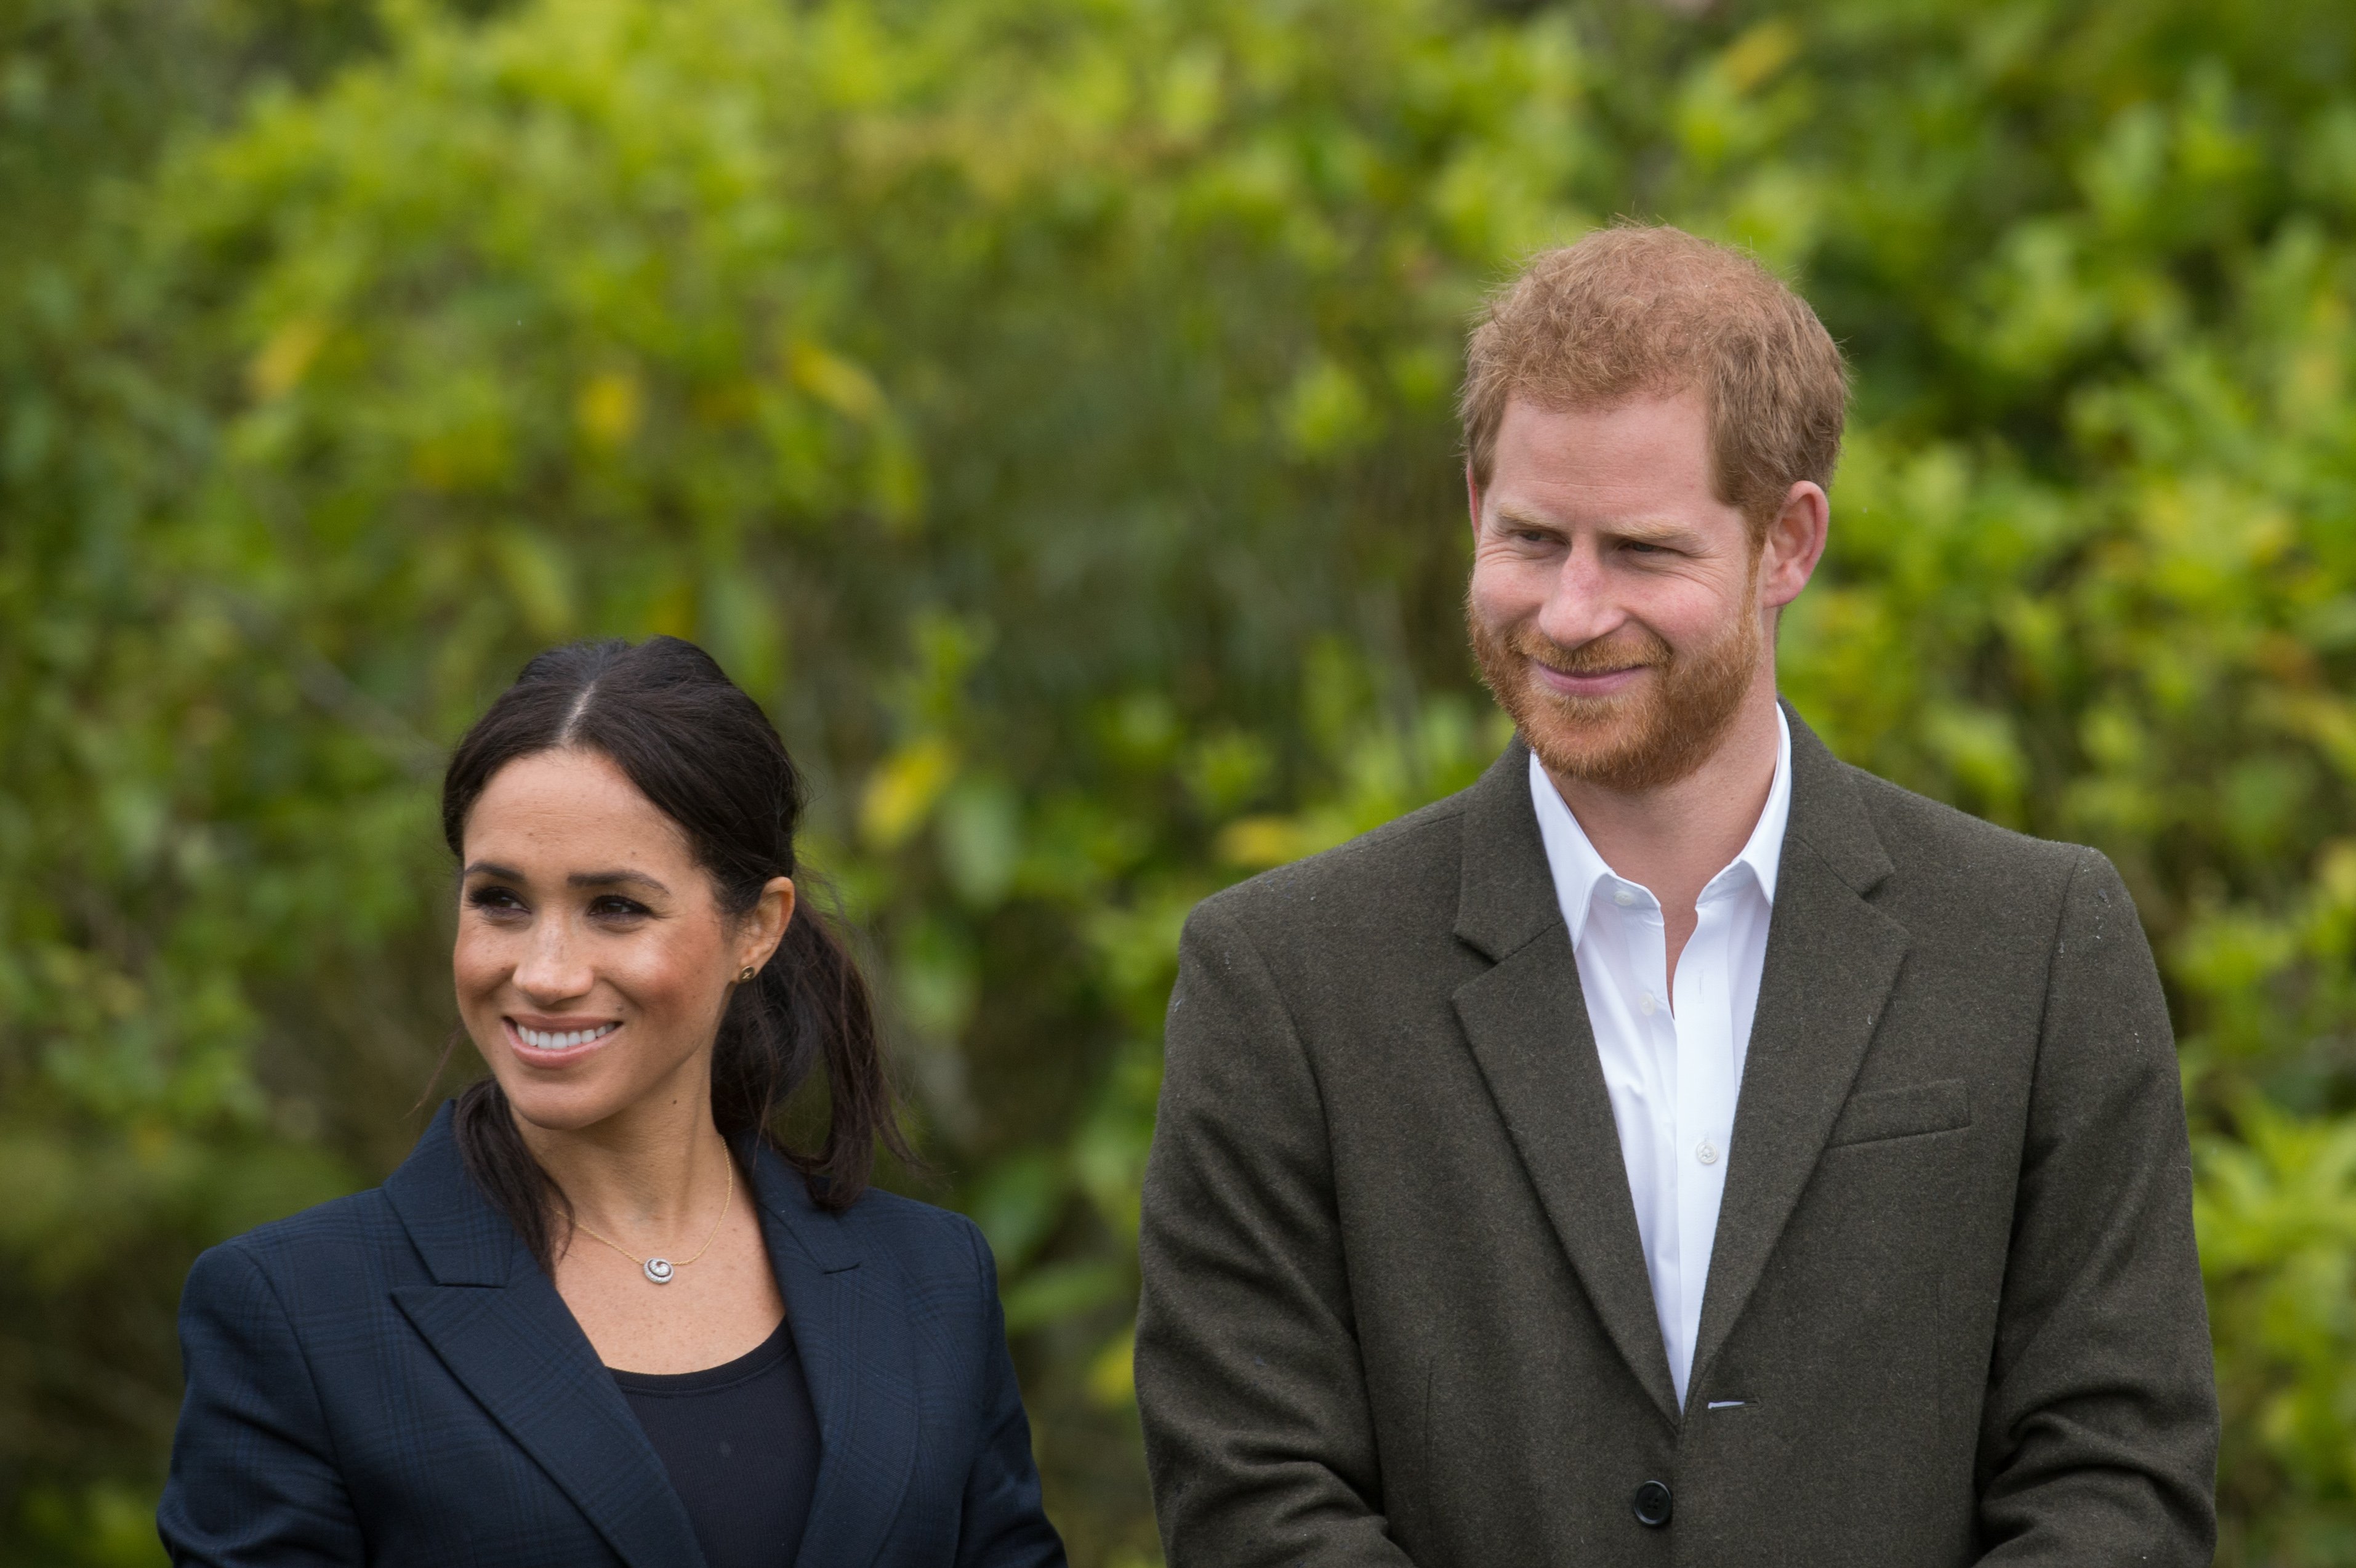 Meghan Markle and Prince Harry smiling in front of greenery